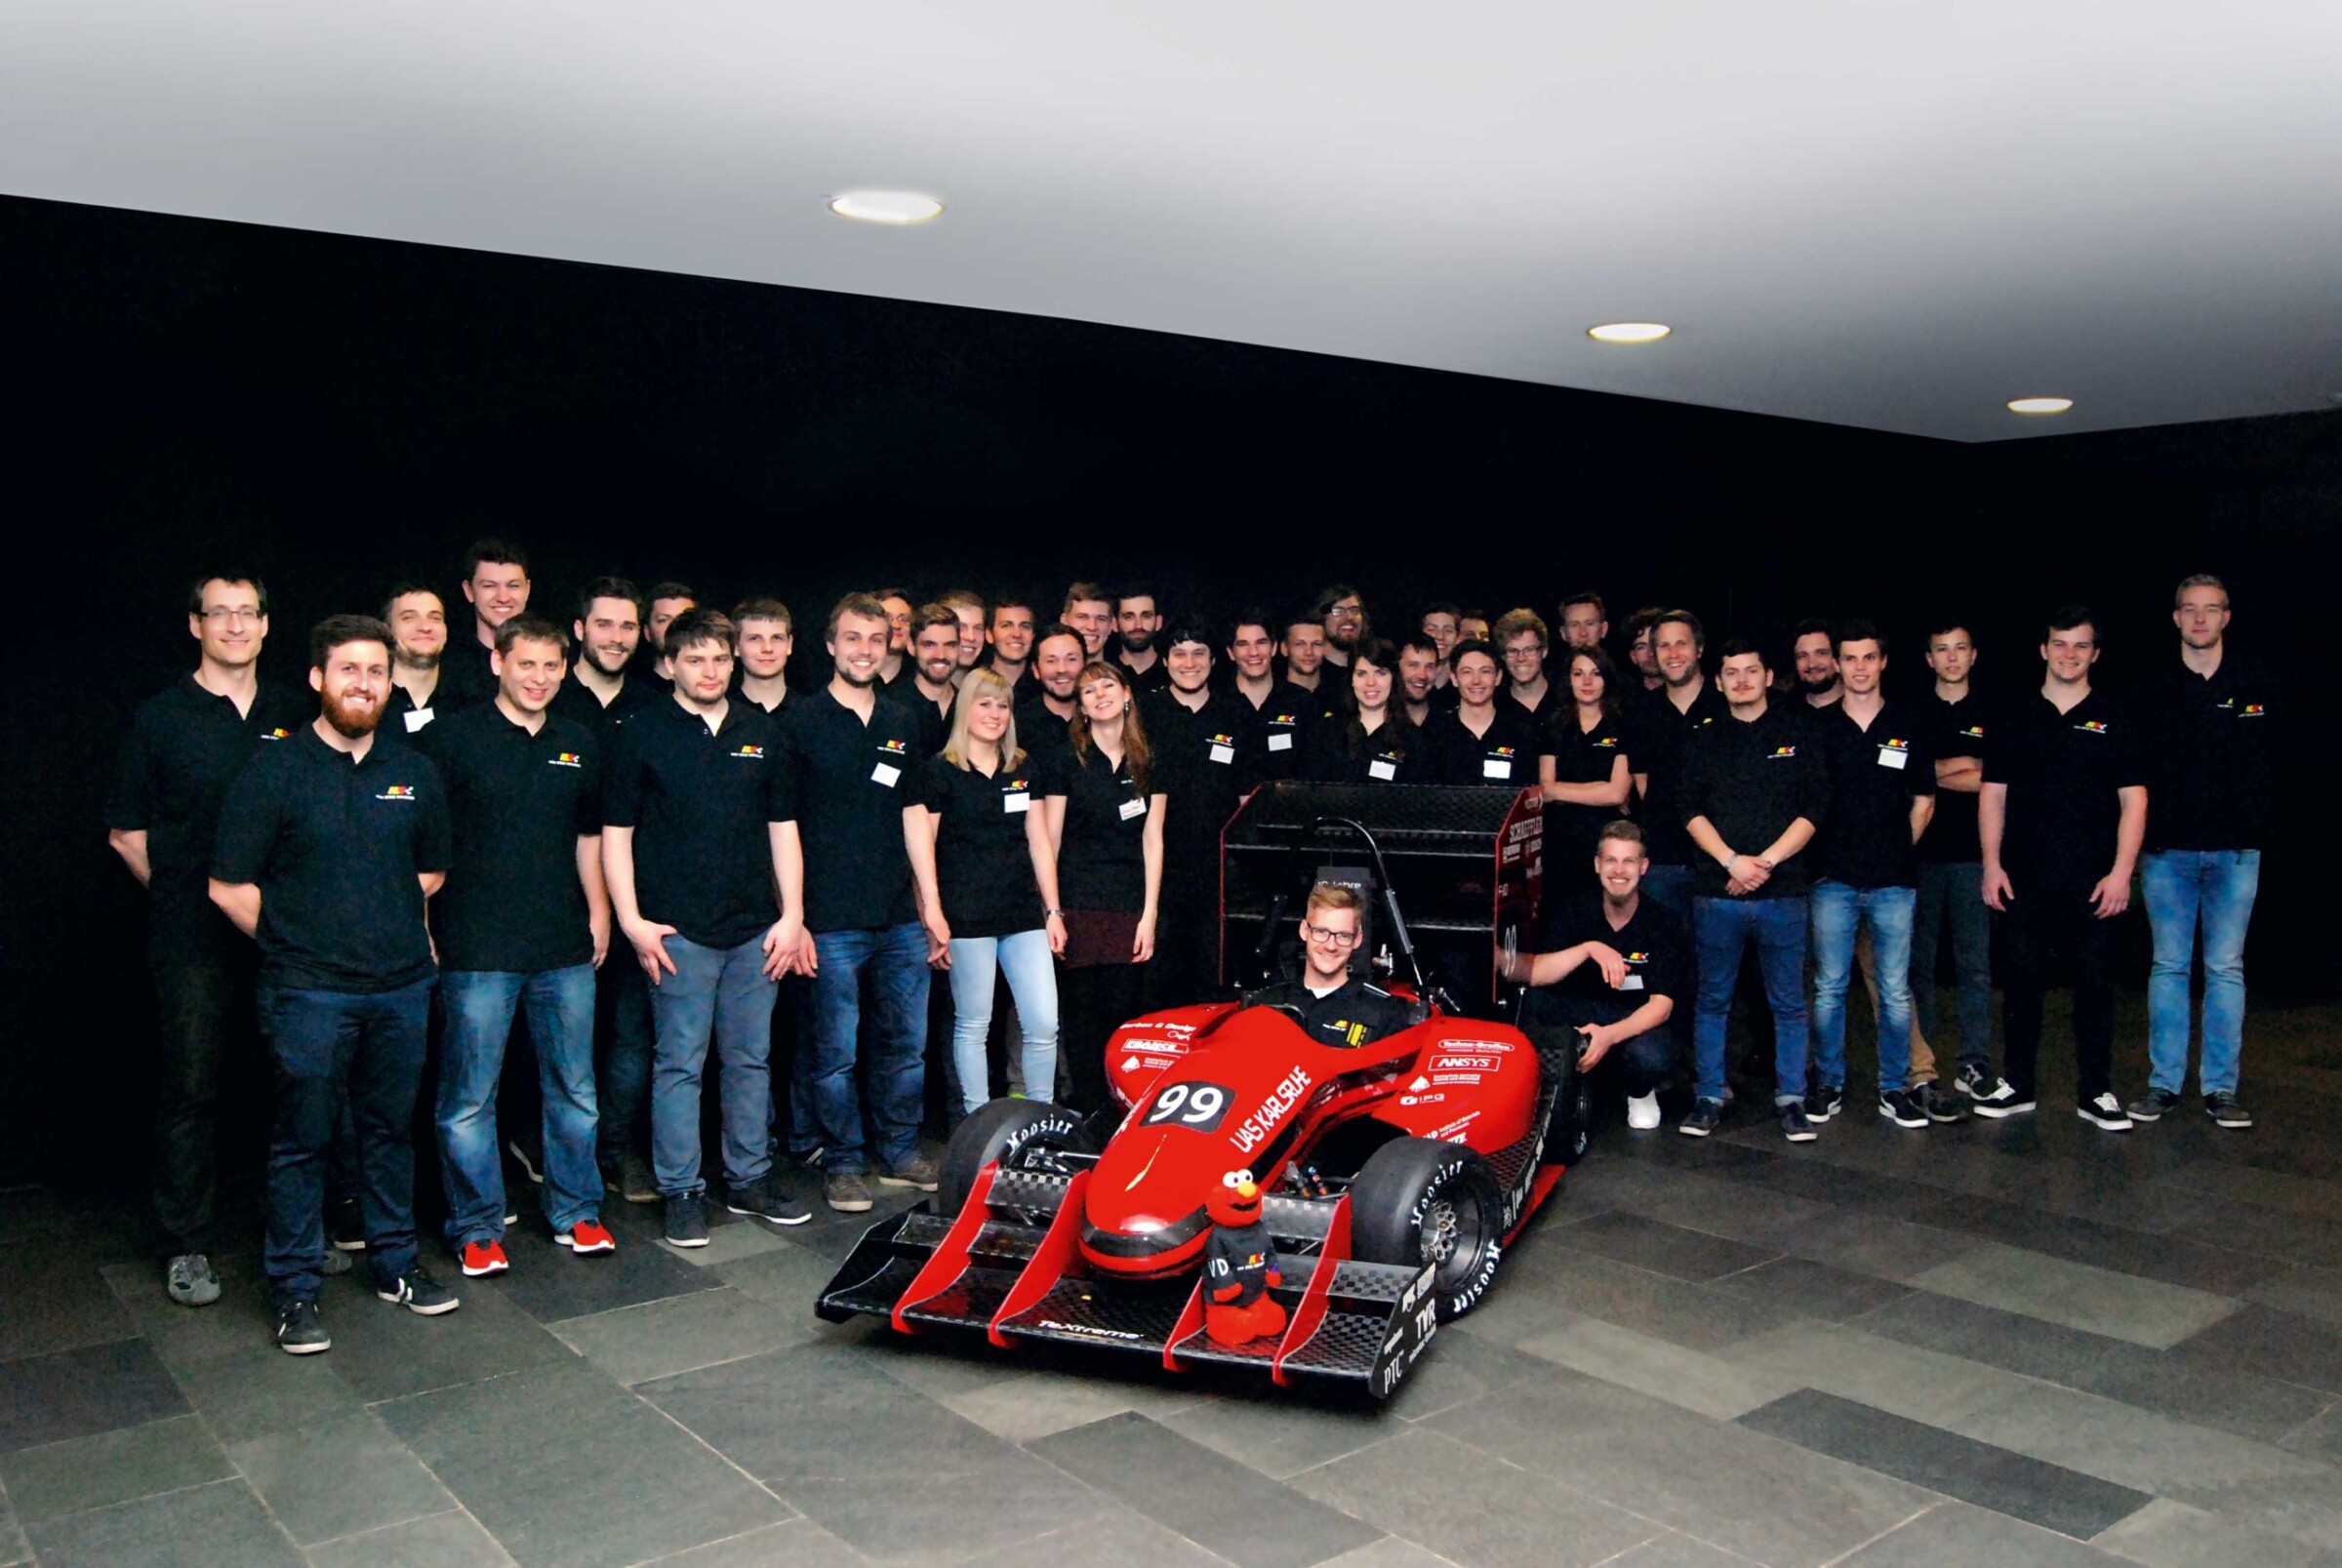 The team of Karlsruhe University is delighted with its outstanding position achieved in the Formula Student Germany 2016 design competition.